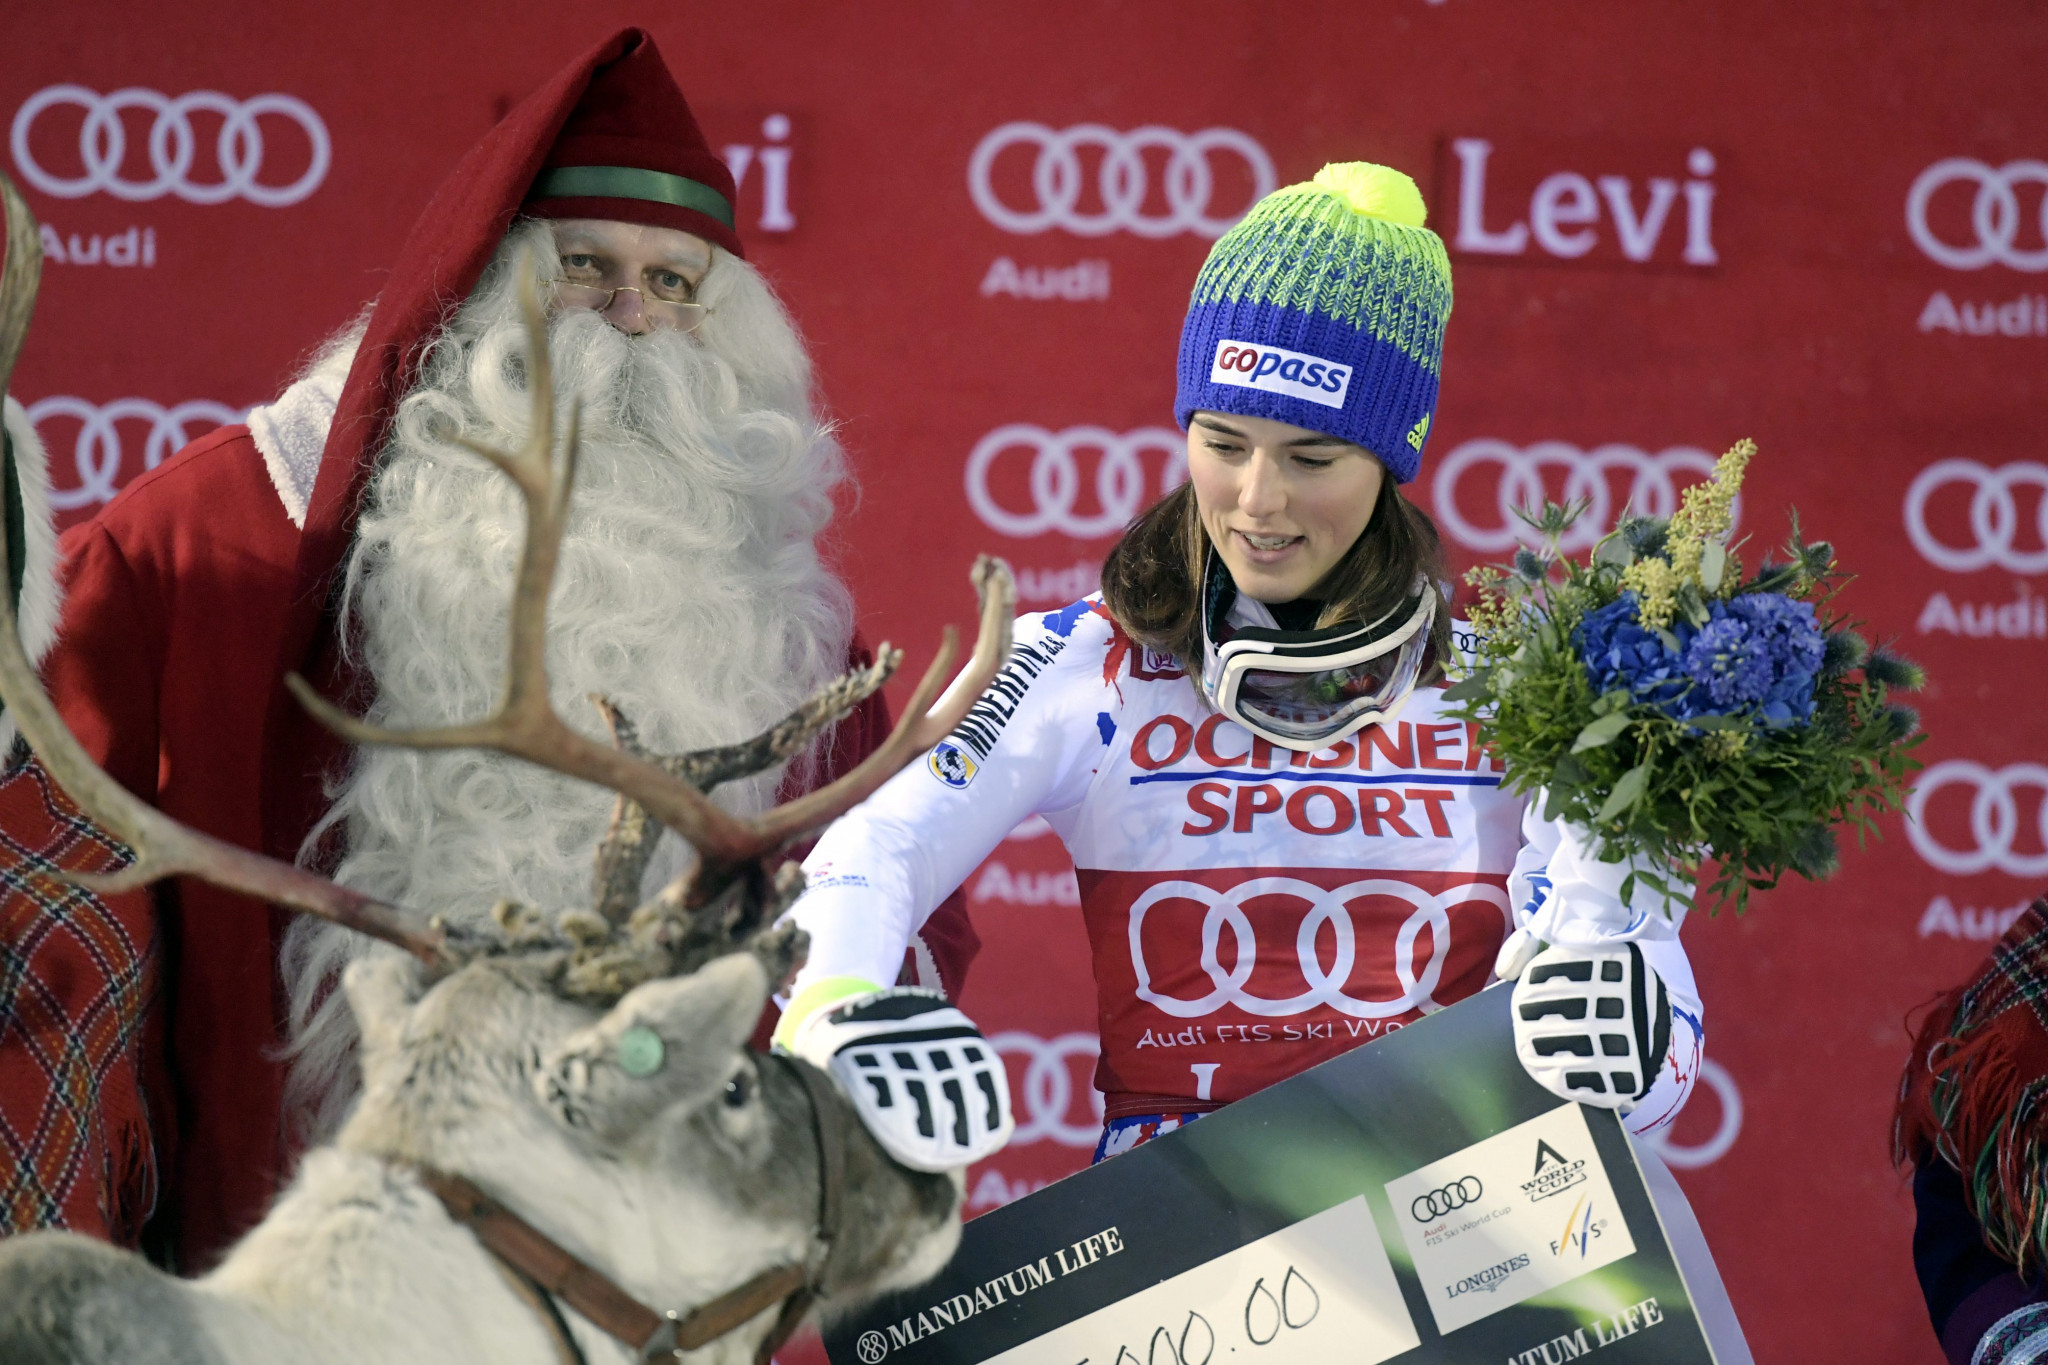 Slovakia's Petra Vlhova was awarded a reindeer which she named Igor after her father ©Getty Images